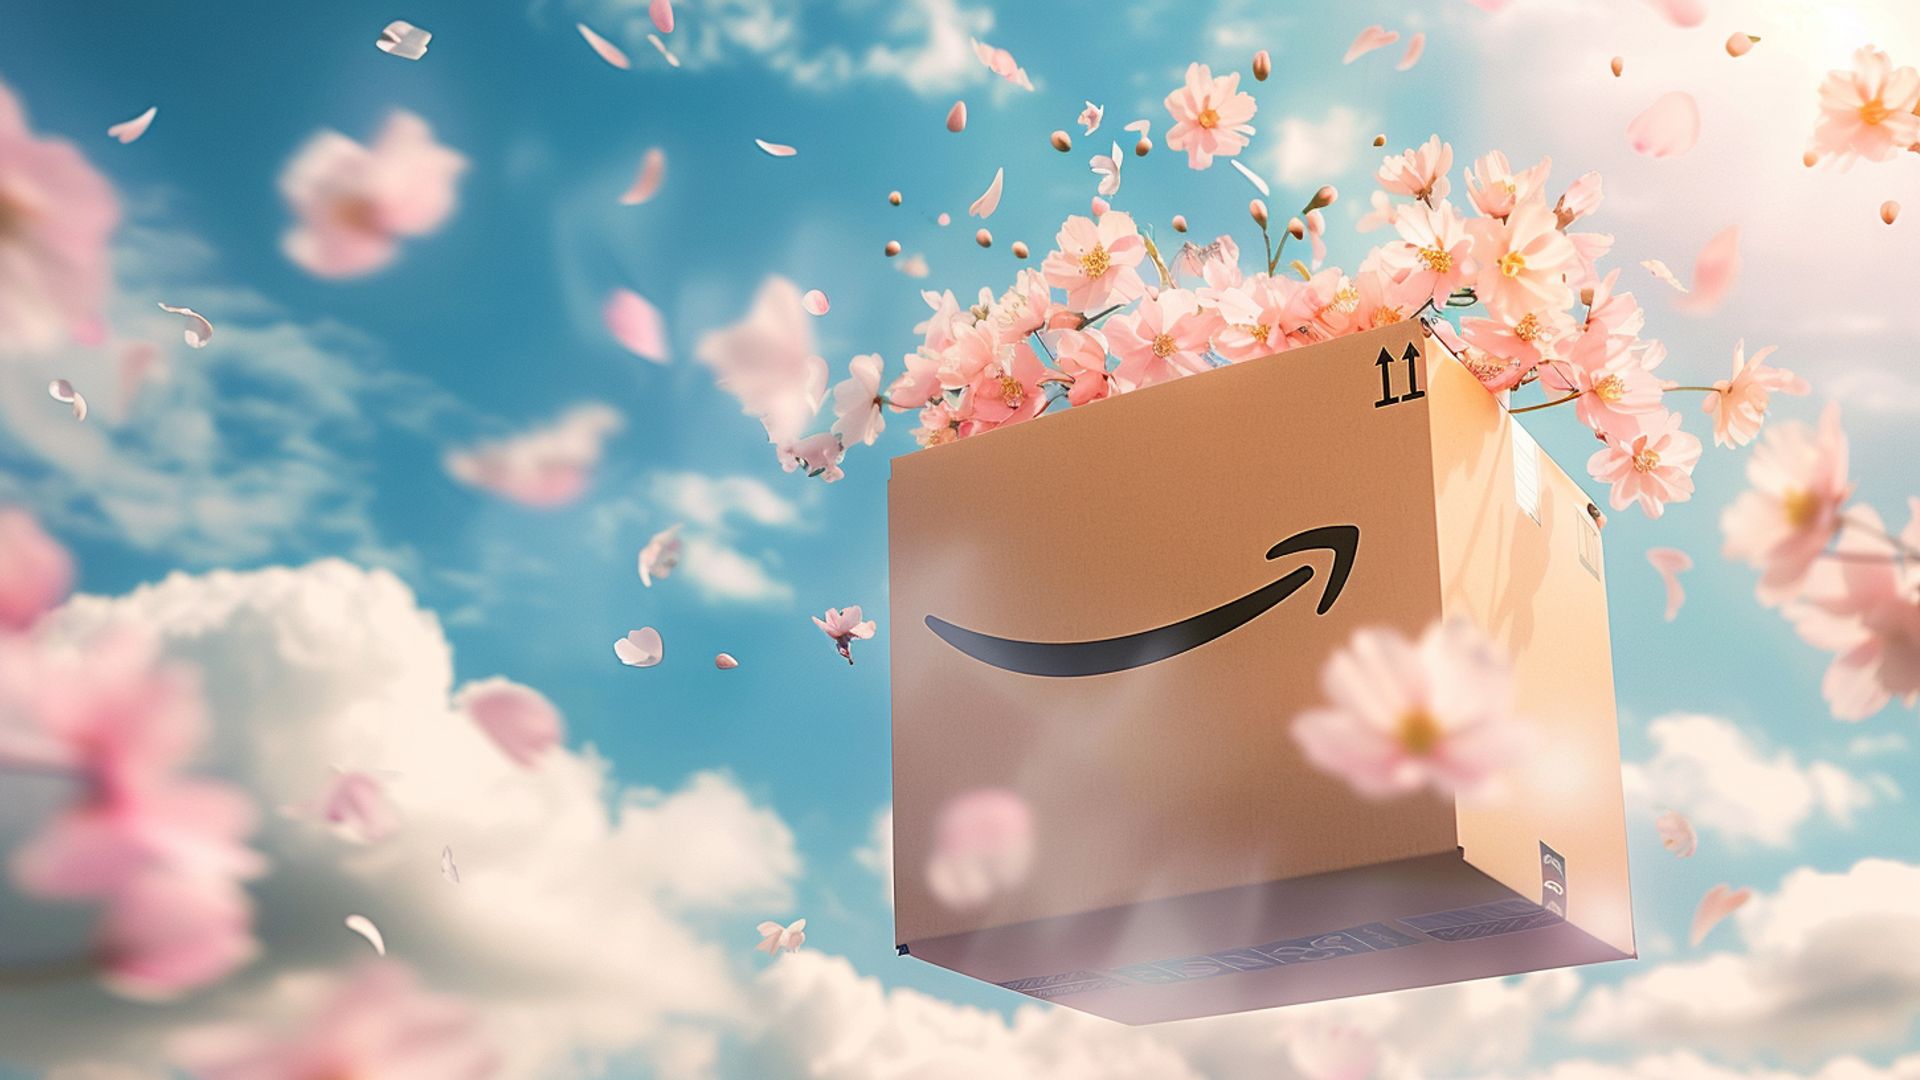 Missed Amazon's big Spring Sale? You can still get these 19 amazing deals